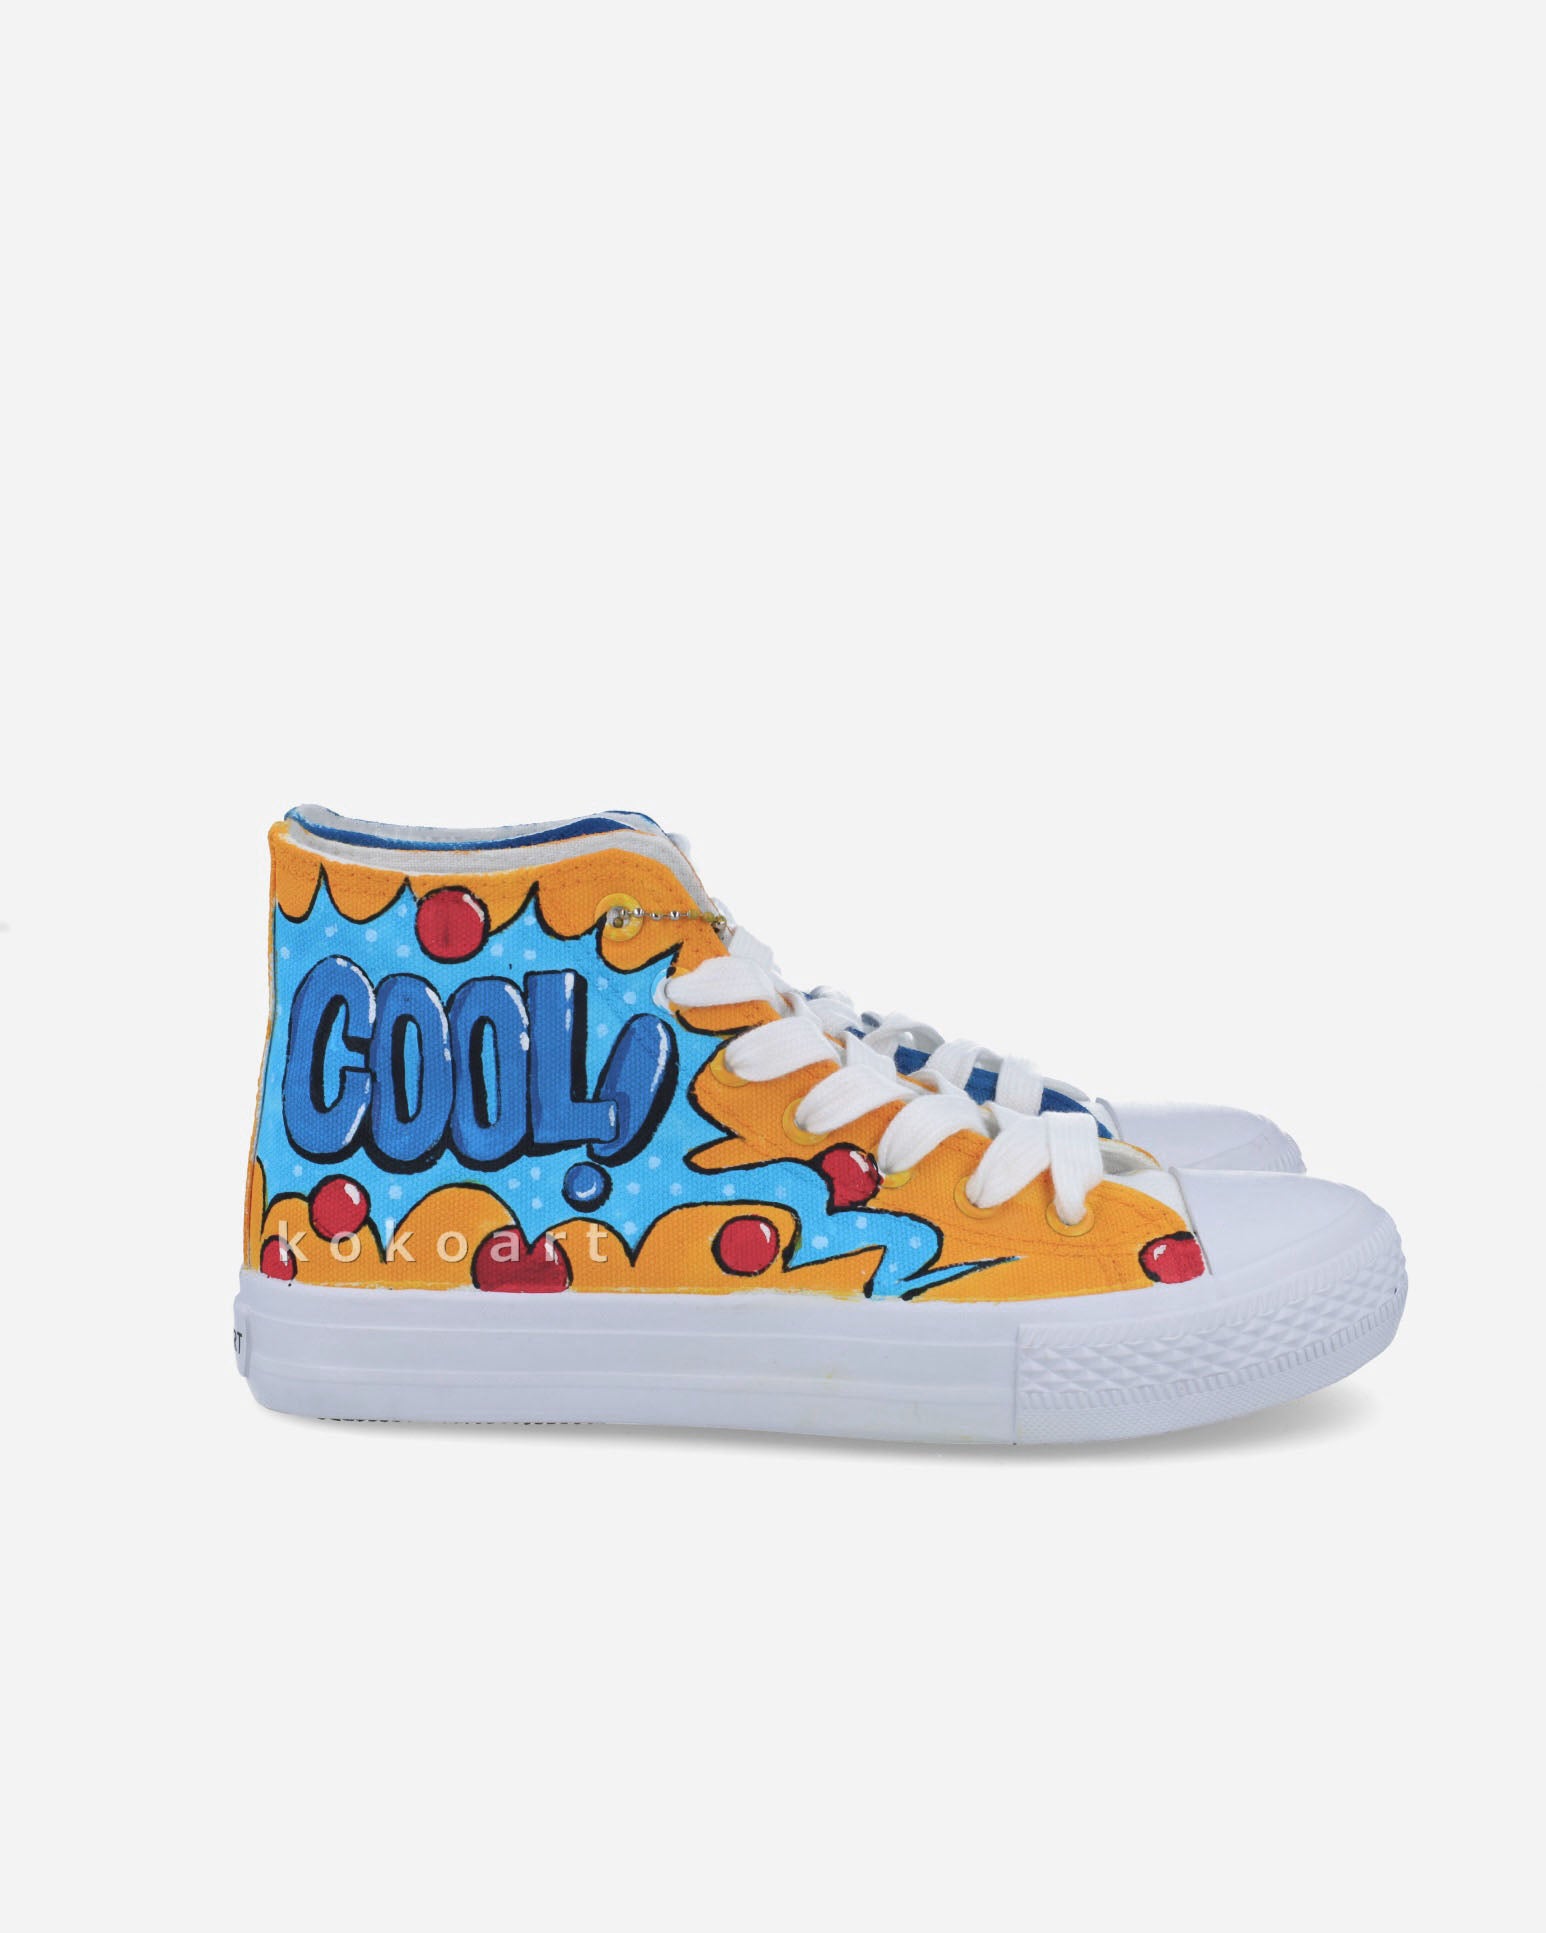 Pop Art Hand Painted Shoes